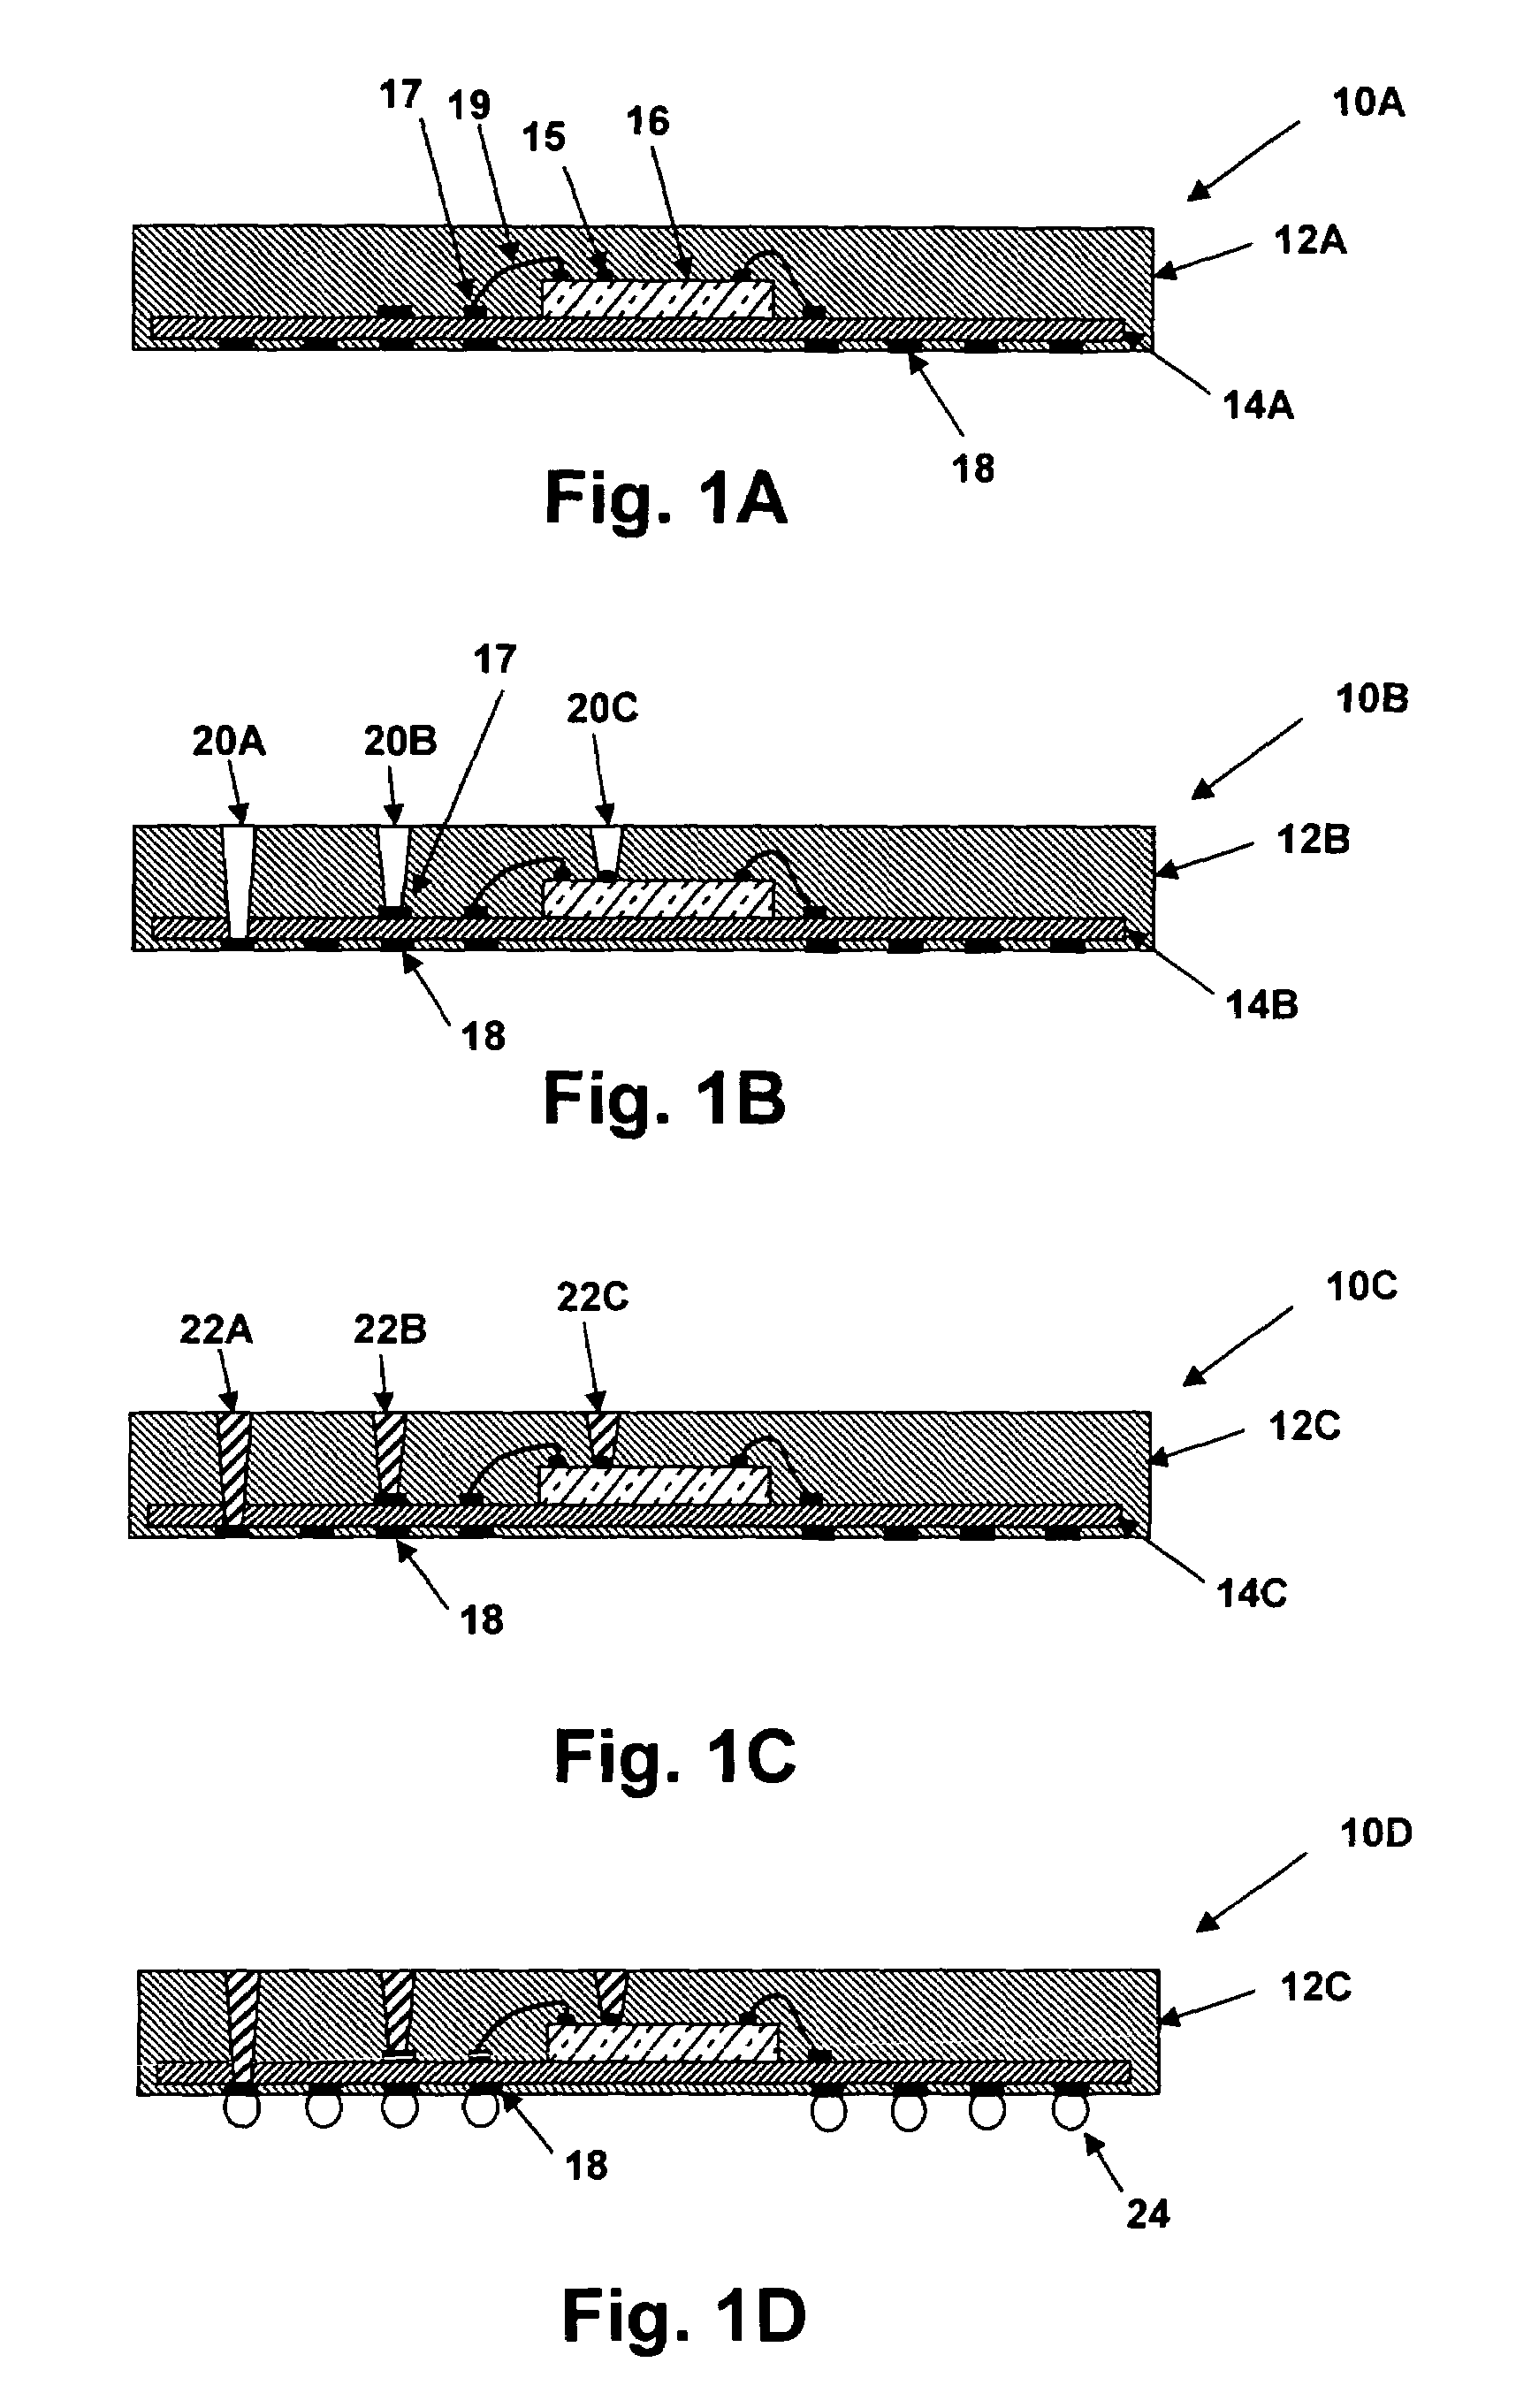 Method of manufacturing a semiconductor package